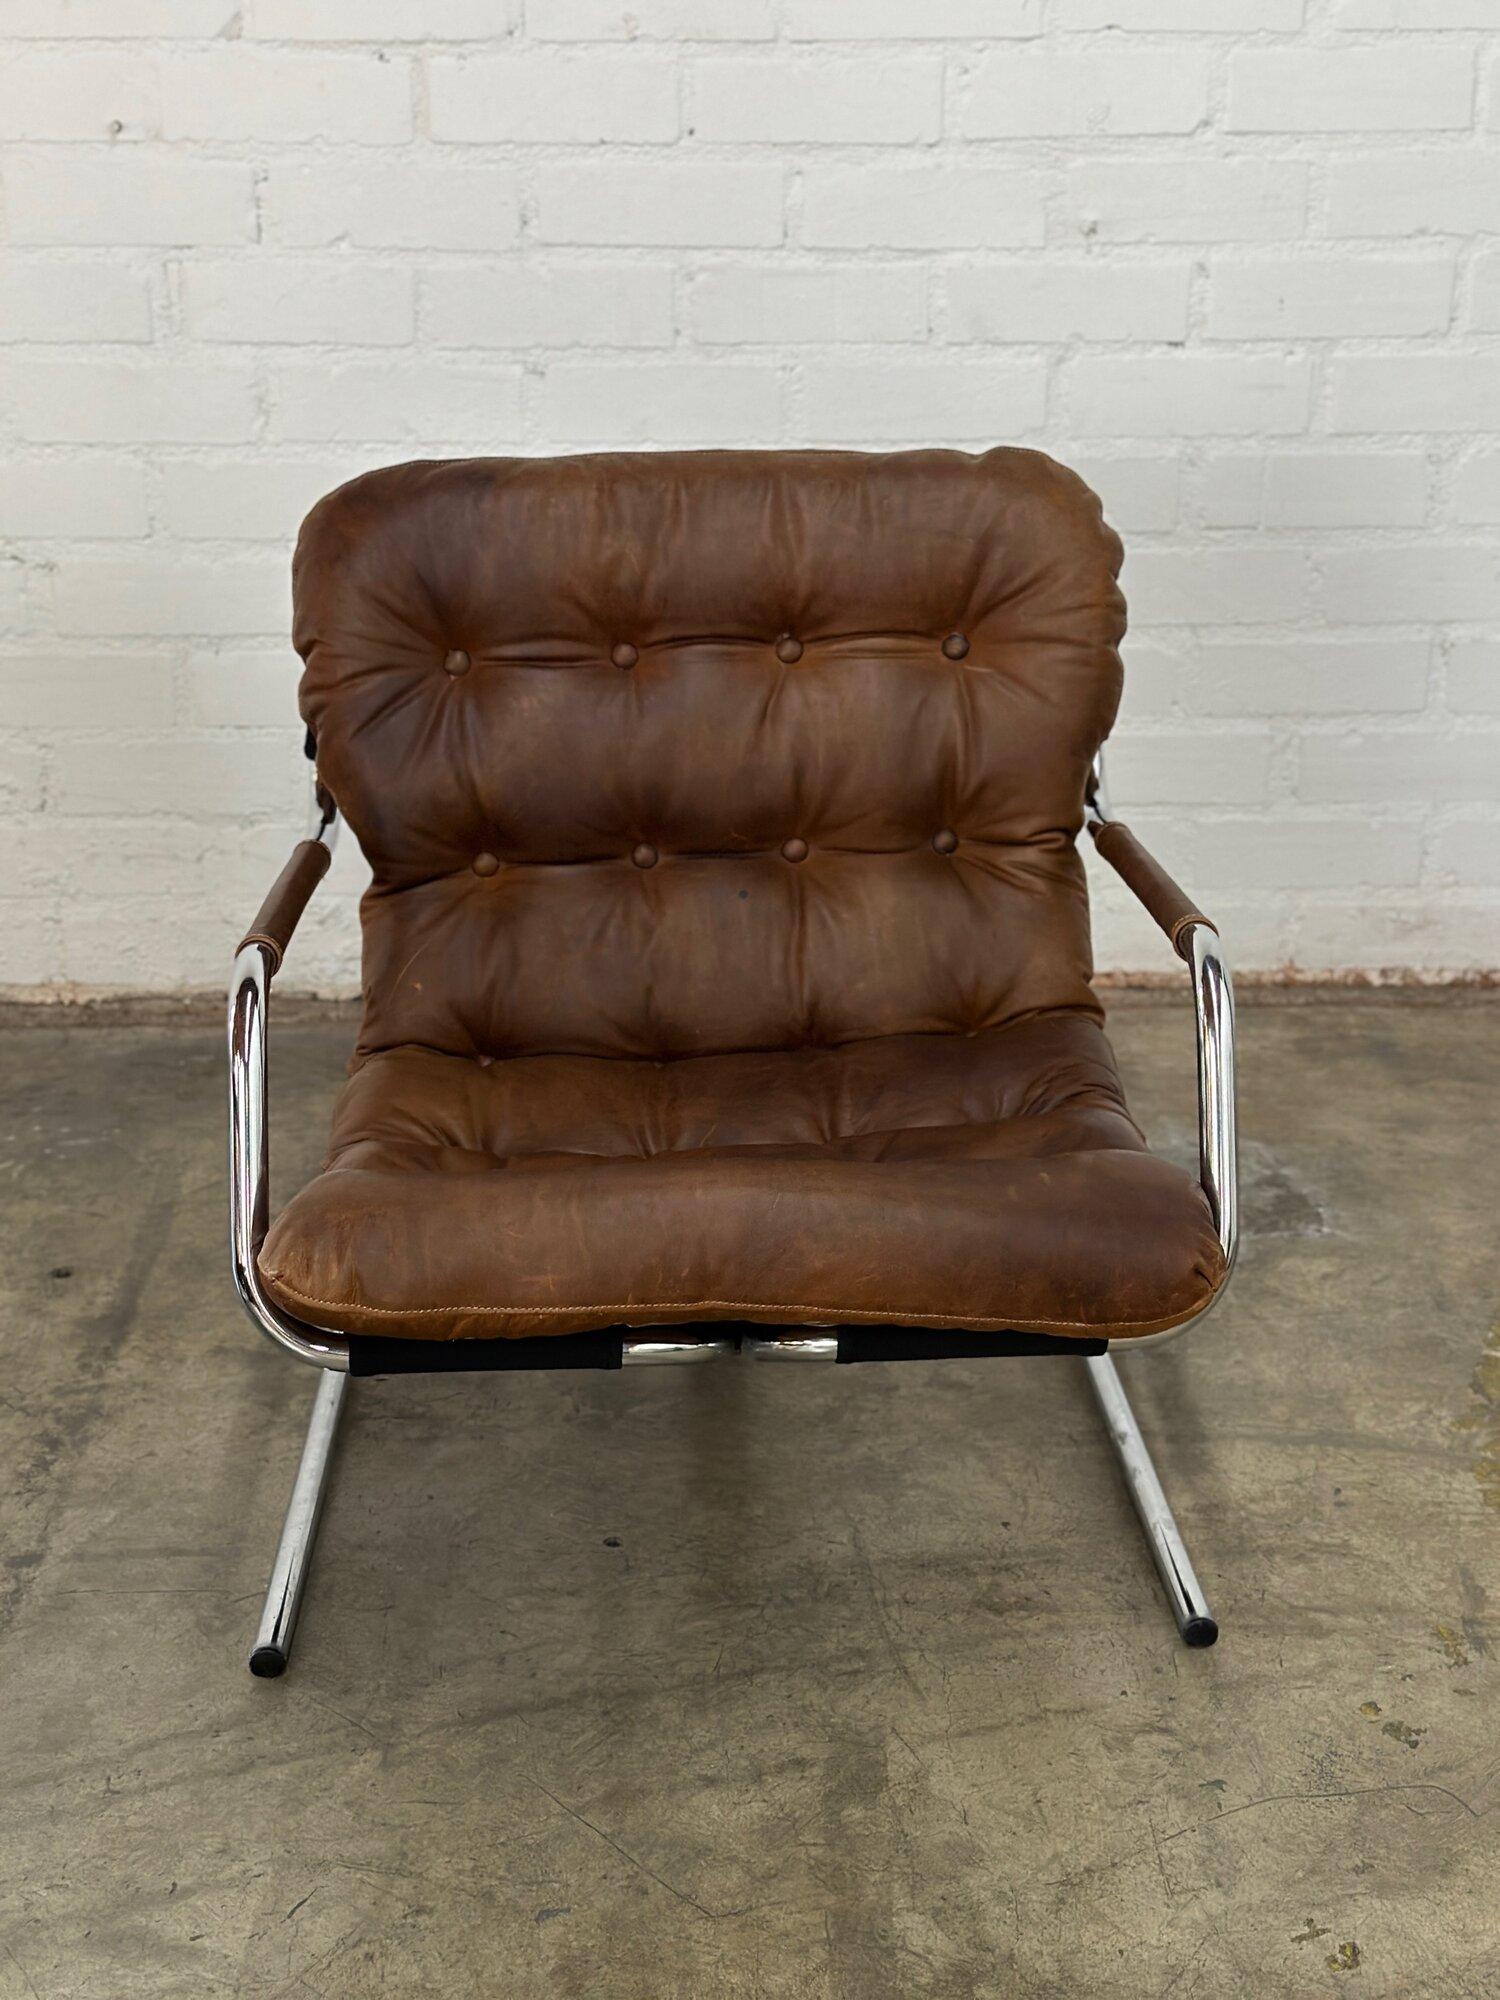 Leather Cantilevered Italian Lounge chairs - sold separately